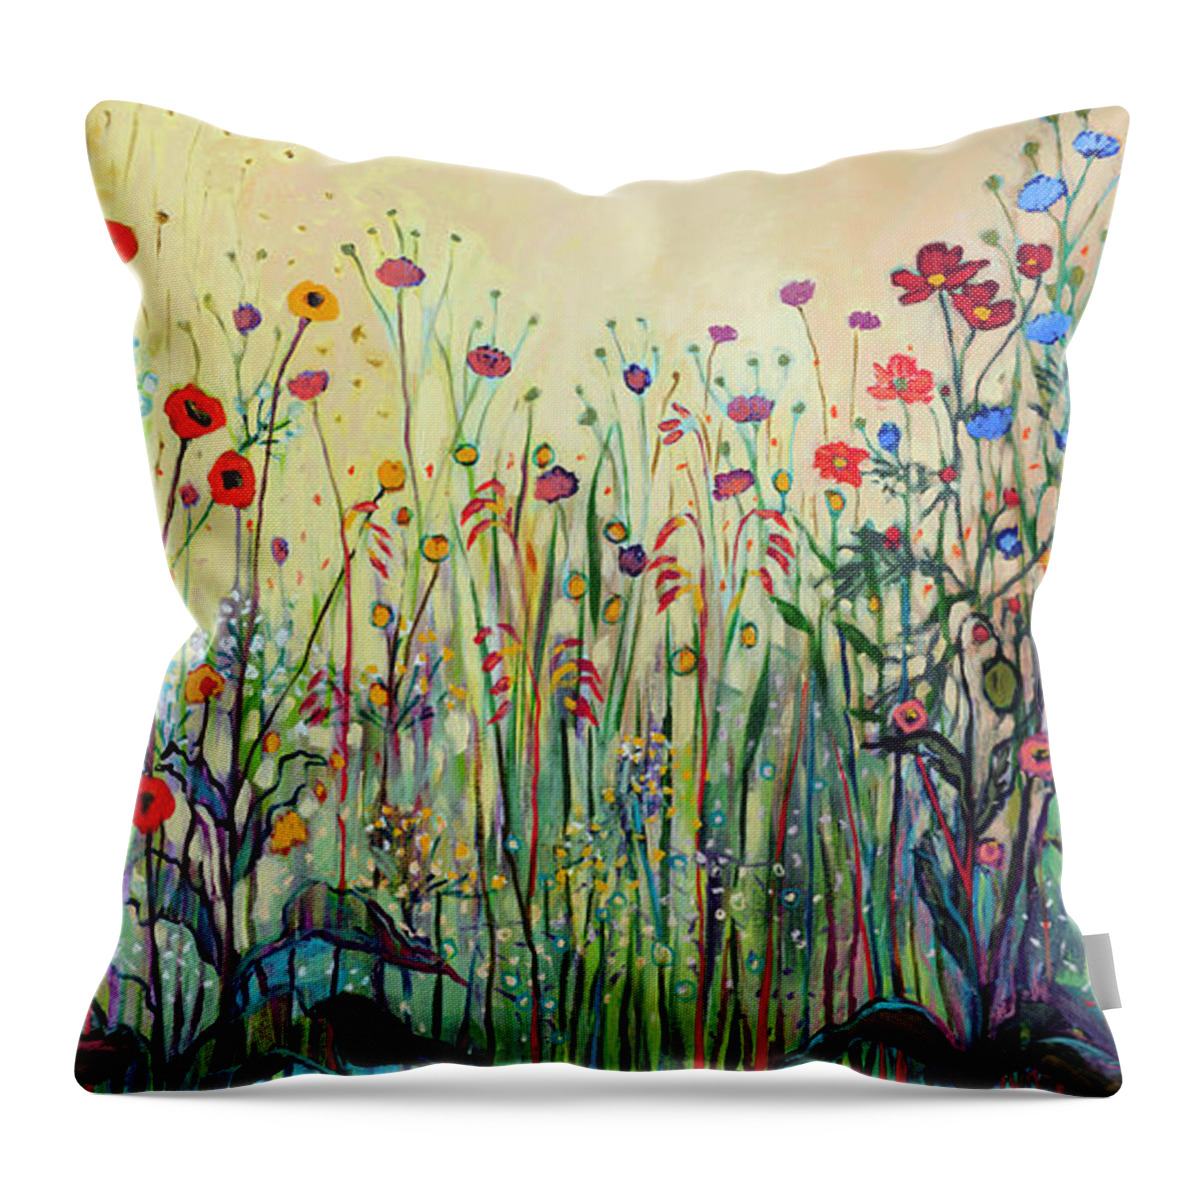 Floral Throw Pillow featuring the painting Summer Joy by Jennifer Lommers